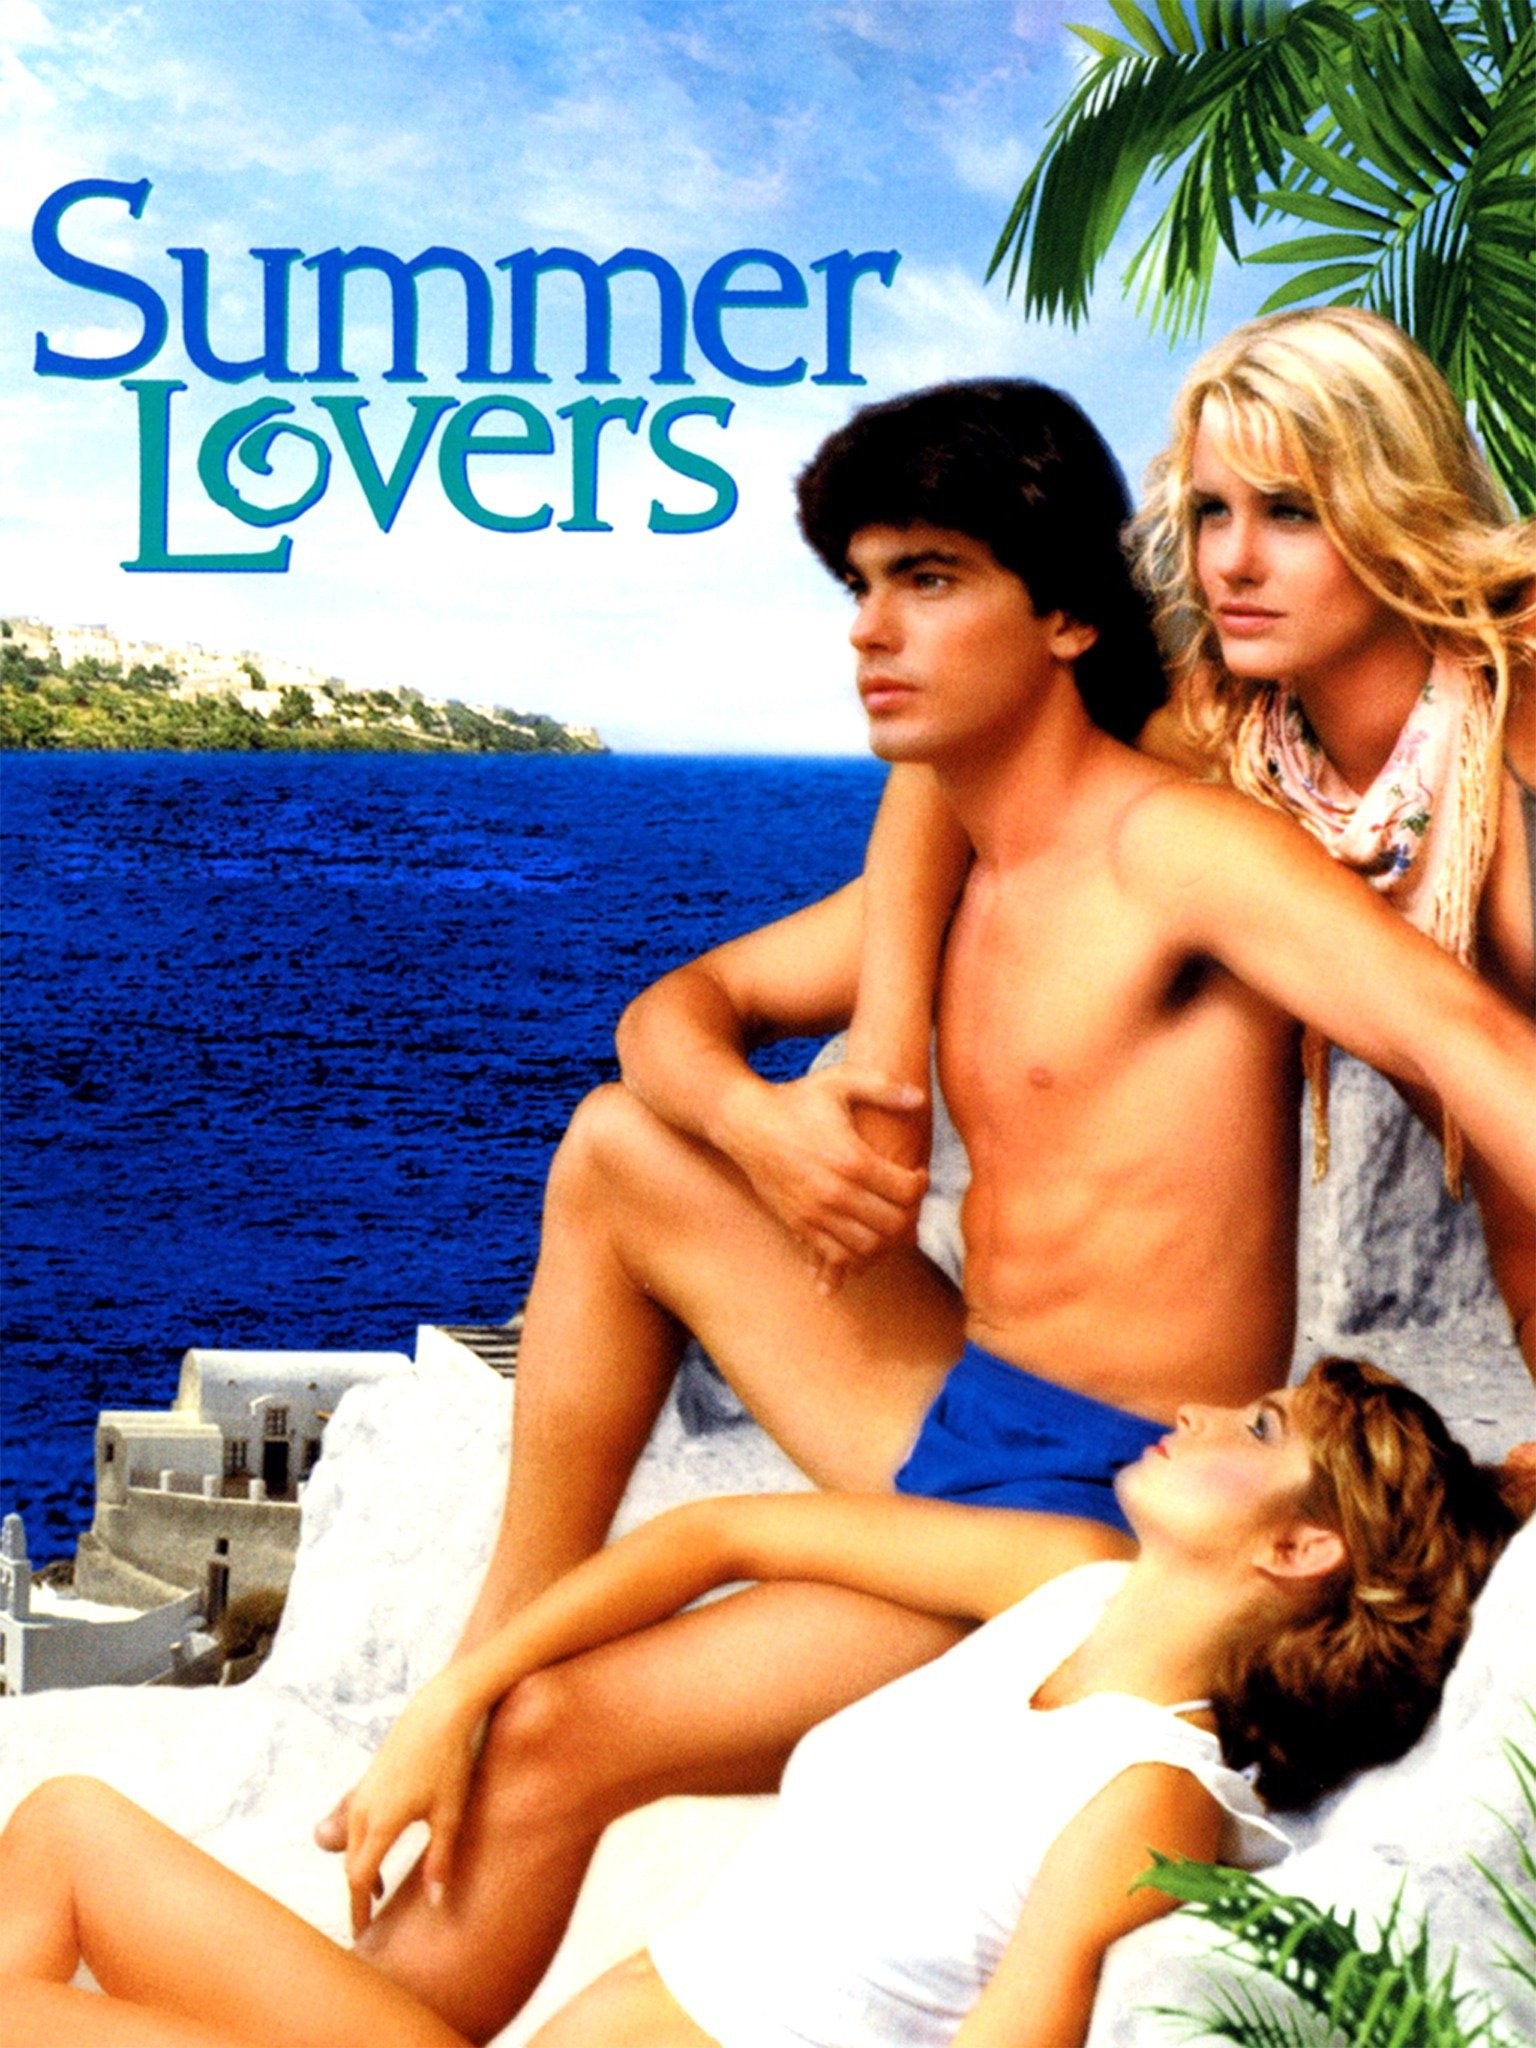 Summertime movie review & film summary (2021)